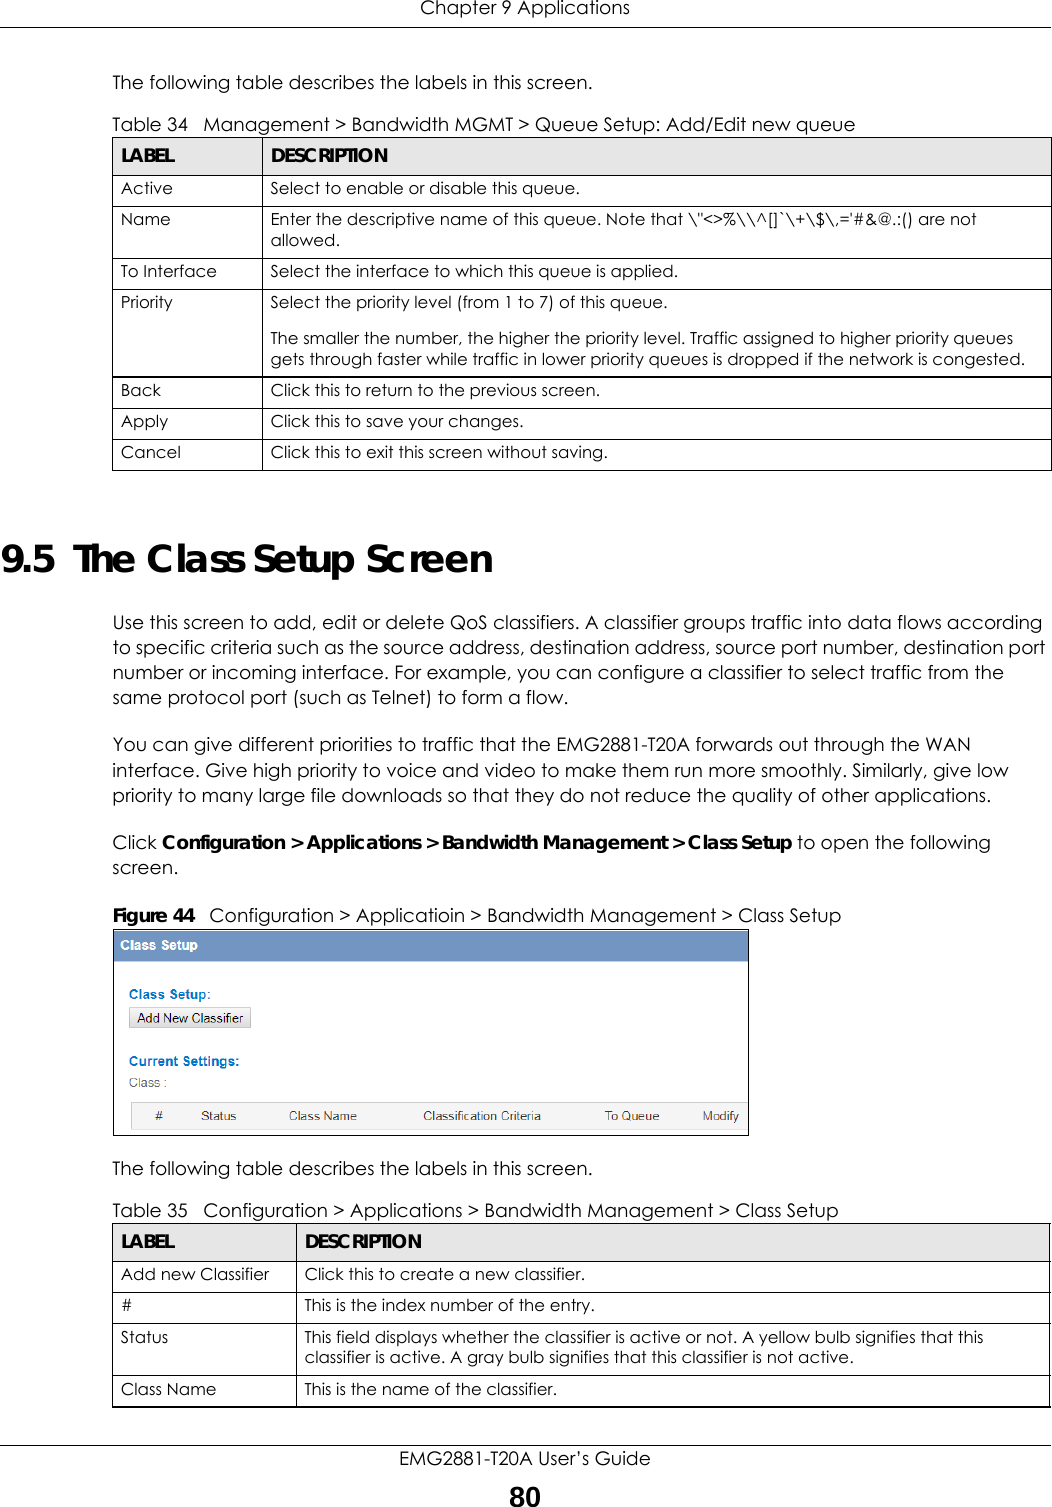 Chapter 9 ApplicationsEMG2881-T20A User’s Guide80The following table describes the labels in this screen.  9.5  The Class Setup Screen Use this screen to add, edit or delete QoS classifiers. A classifier groups traffic into data flows according to specific criteria such as the source address, destination address, source port number, destination port number or incoming interface. For example, you can configure a classifier to select traffic from the same protocol port (such as Telnet) to form a flow.You can give different priorities to traffic that the EMG2881-T20A forwards out through the WAN interface. Give high priority to voice and video to make them run more smoothly. Similarly, give low priority to many large file downloads so that they do not reduce the quality of other applications. Click Configuration &gt; Applications &gt; Bandwidth Management &gt; Class Setup to open the following screen.Figure 44   Configuration &gt; Applicatioin &gt; Bandwidth Management &gt; Class SetupThe following table describes the labels in this screen.  Table 34   Management &gt; Bandwidth MGMT &gt; Queue Setup: Add/Edit new queueLABEL DESCRIPTIONActive Select to enable or disable this queue.Name Enter the descriptive name of this queue. Note that \&quot;&lt;&gt;%\\^[]`\+\$\,=&apos;#&amp;@.:() are not allowed.To Interface Select the interface to which this queue is applied.Priority Select the priority level (from 1 to 7) of this queue.The smaller the number, the higher the priority level. Traffic assigned to higher priority queues gets through faster while traffic in lower priority queues is dropped if the network is congested.Back Click this to return to the previous screen.Apply Click this to save your changes.Cancel Click this to exit this screen without saving.Table 35   Configuration &gt; Applications &gt; Bandwidth Management &gt; Class SetupLABEL DESCRIPTIONAdd new Classifier Click this to create a new classifier.#This is the index number of the entry.Status This field displays whether the classifier is active or not. A yellow bulb signifies that this classifier is active. A gray bulb signifies that this classifier is not active.Class Name This is the name of the classifier.